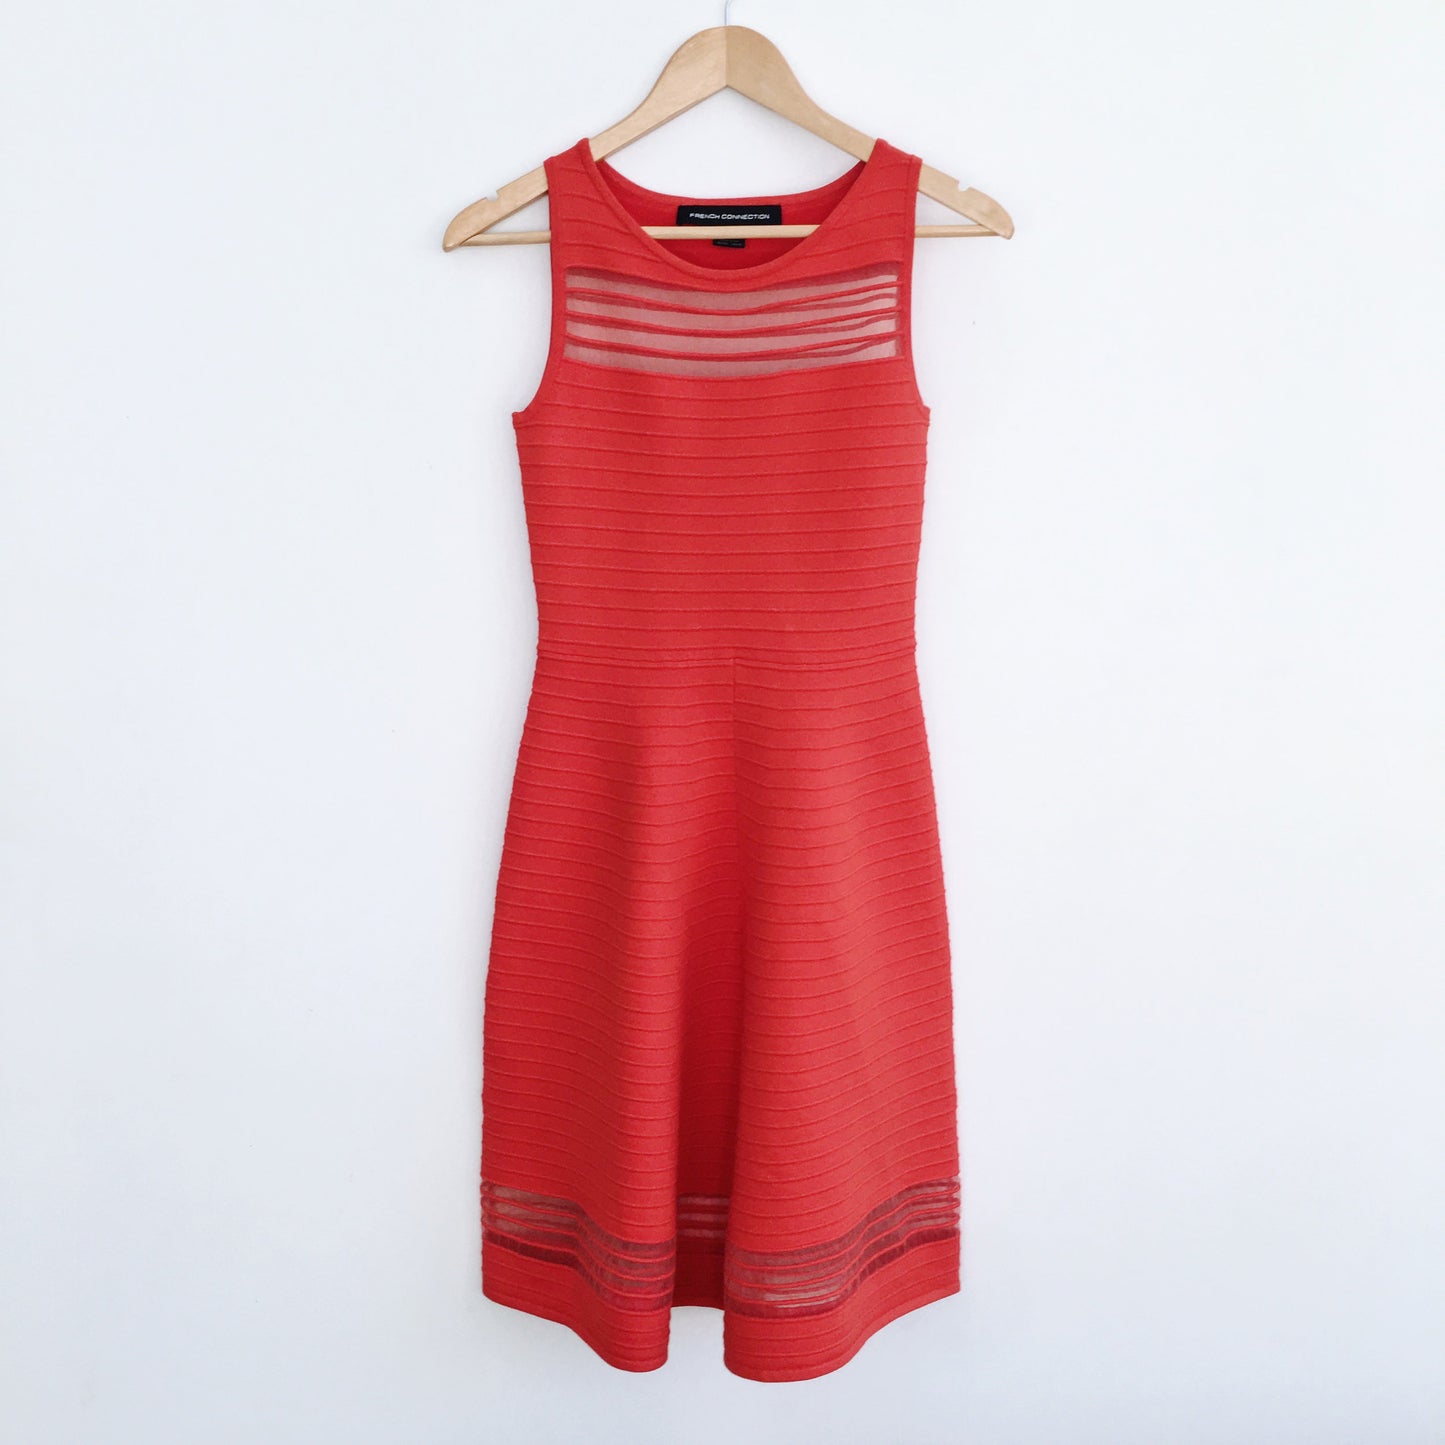 French Connection Tobey Crepe Mini Skater Dress - size Small